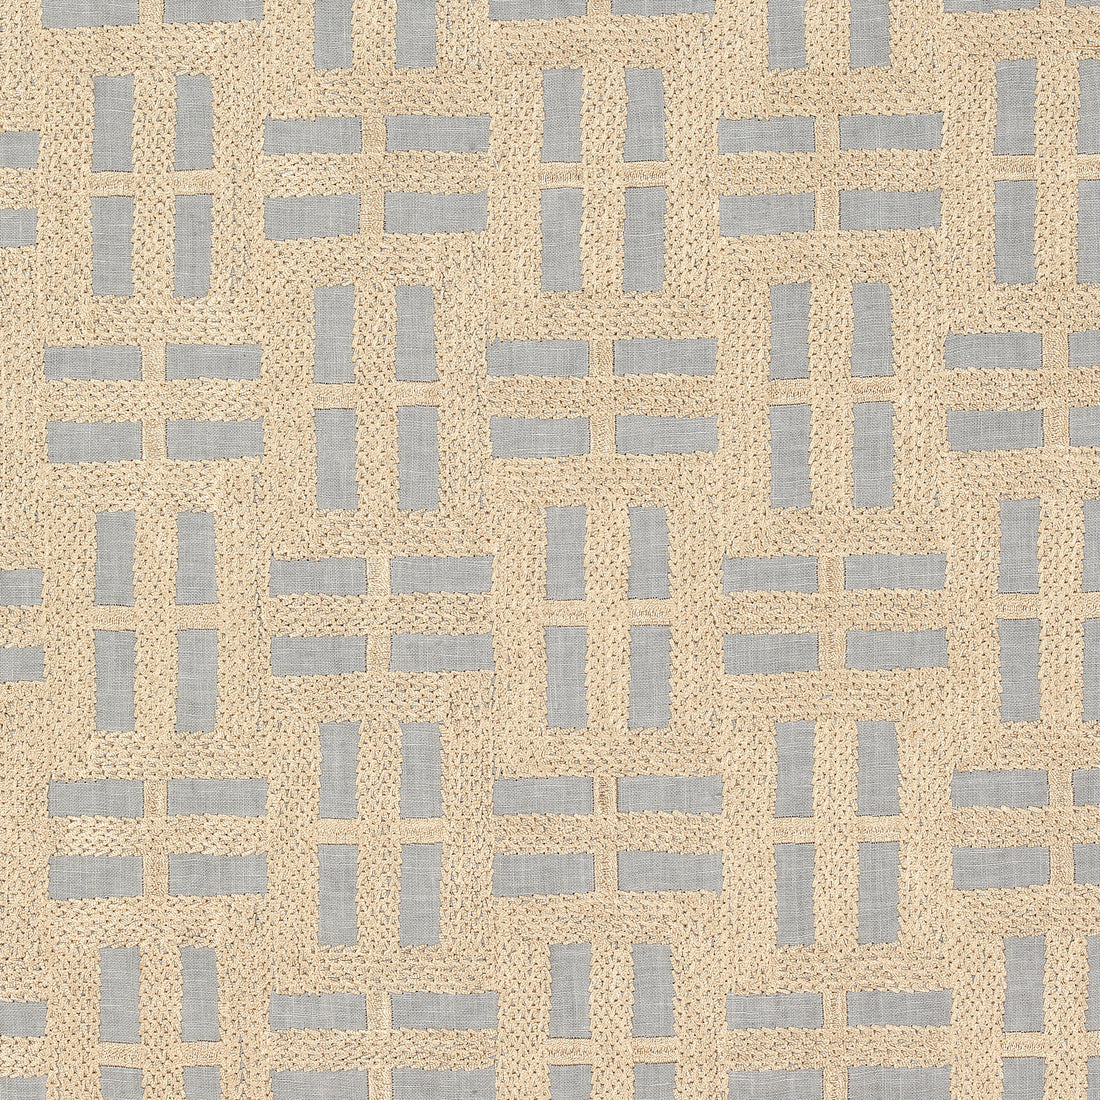 Lock Embroidery fabric in gold on grey color - pattern number AW73002 - by Anna French in the Meridian collection